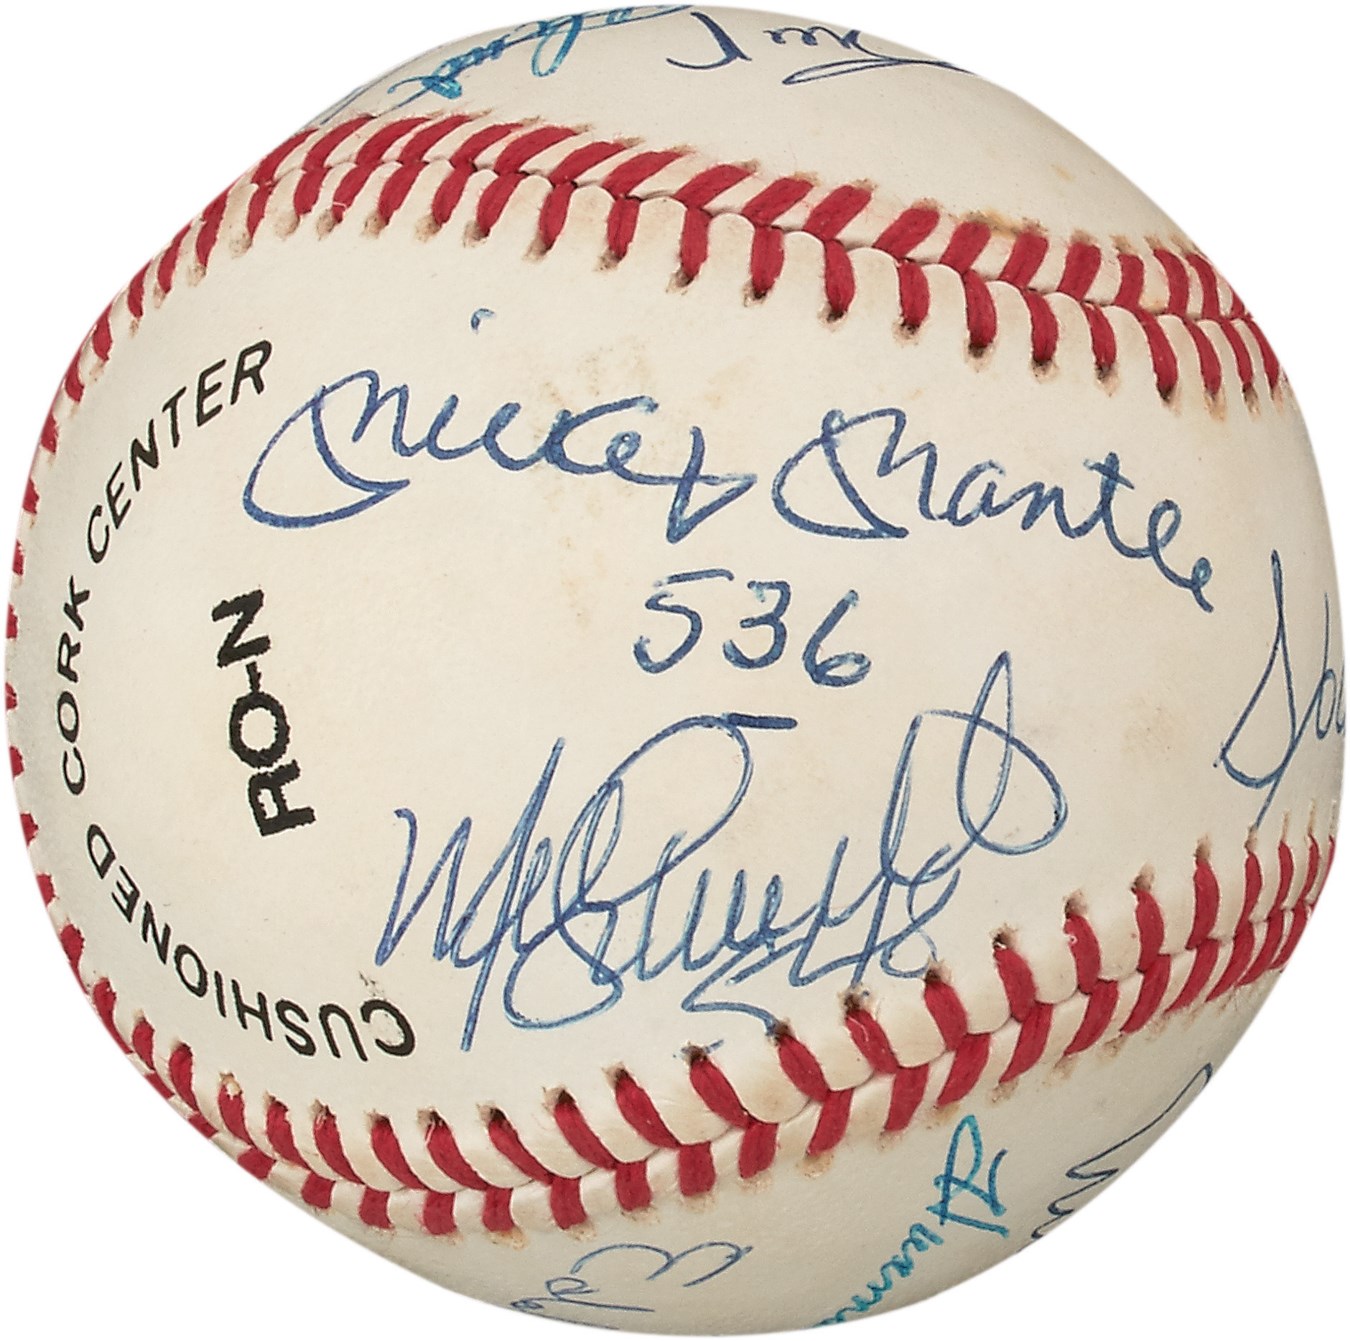 - 500 Home Run Club Signed Baseball with Home Run Totals - Signed by 12 inc: Mantle & Williams (PSA)